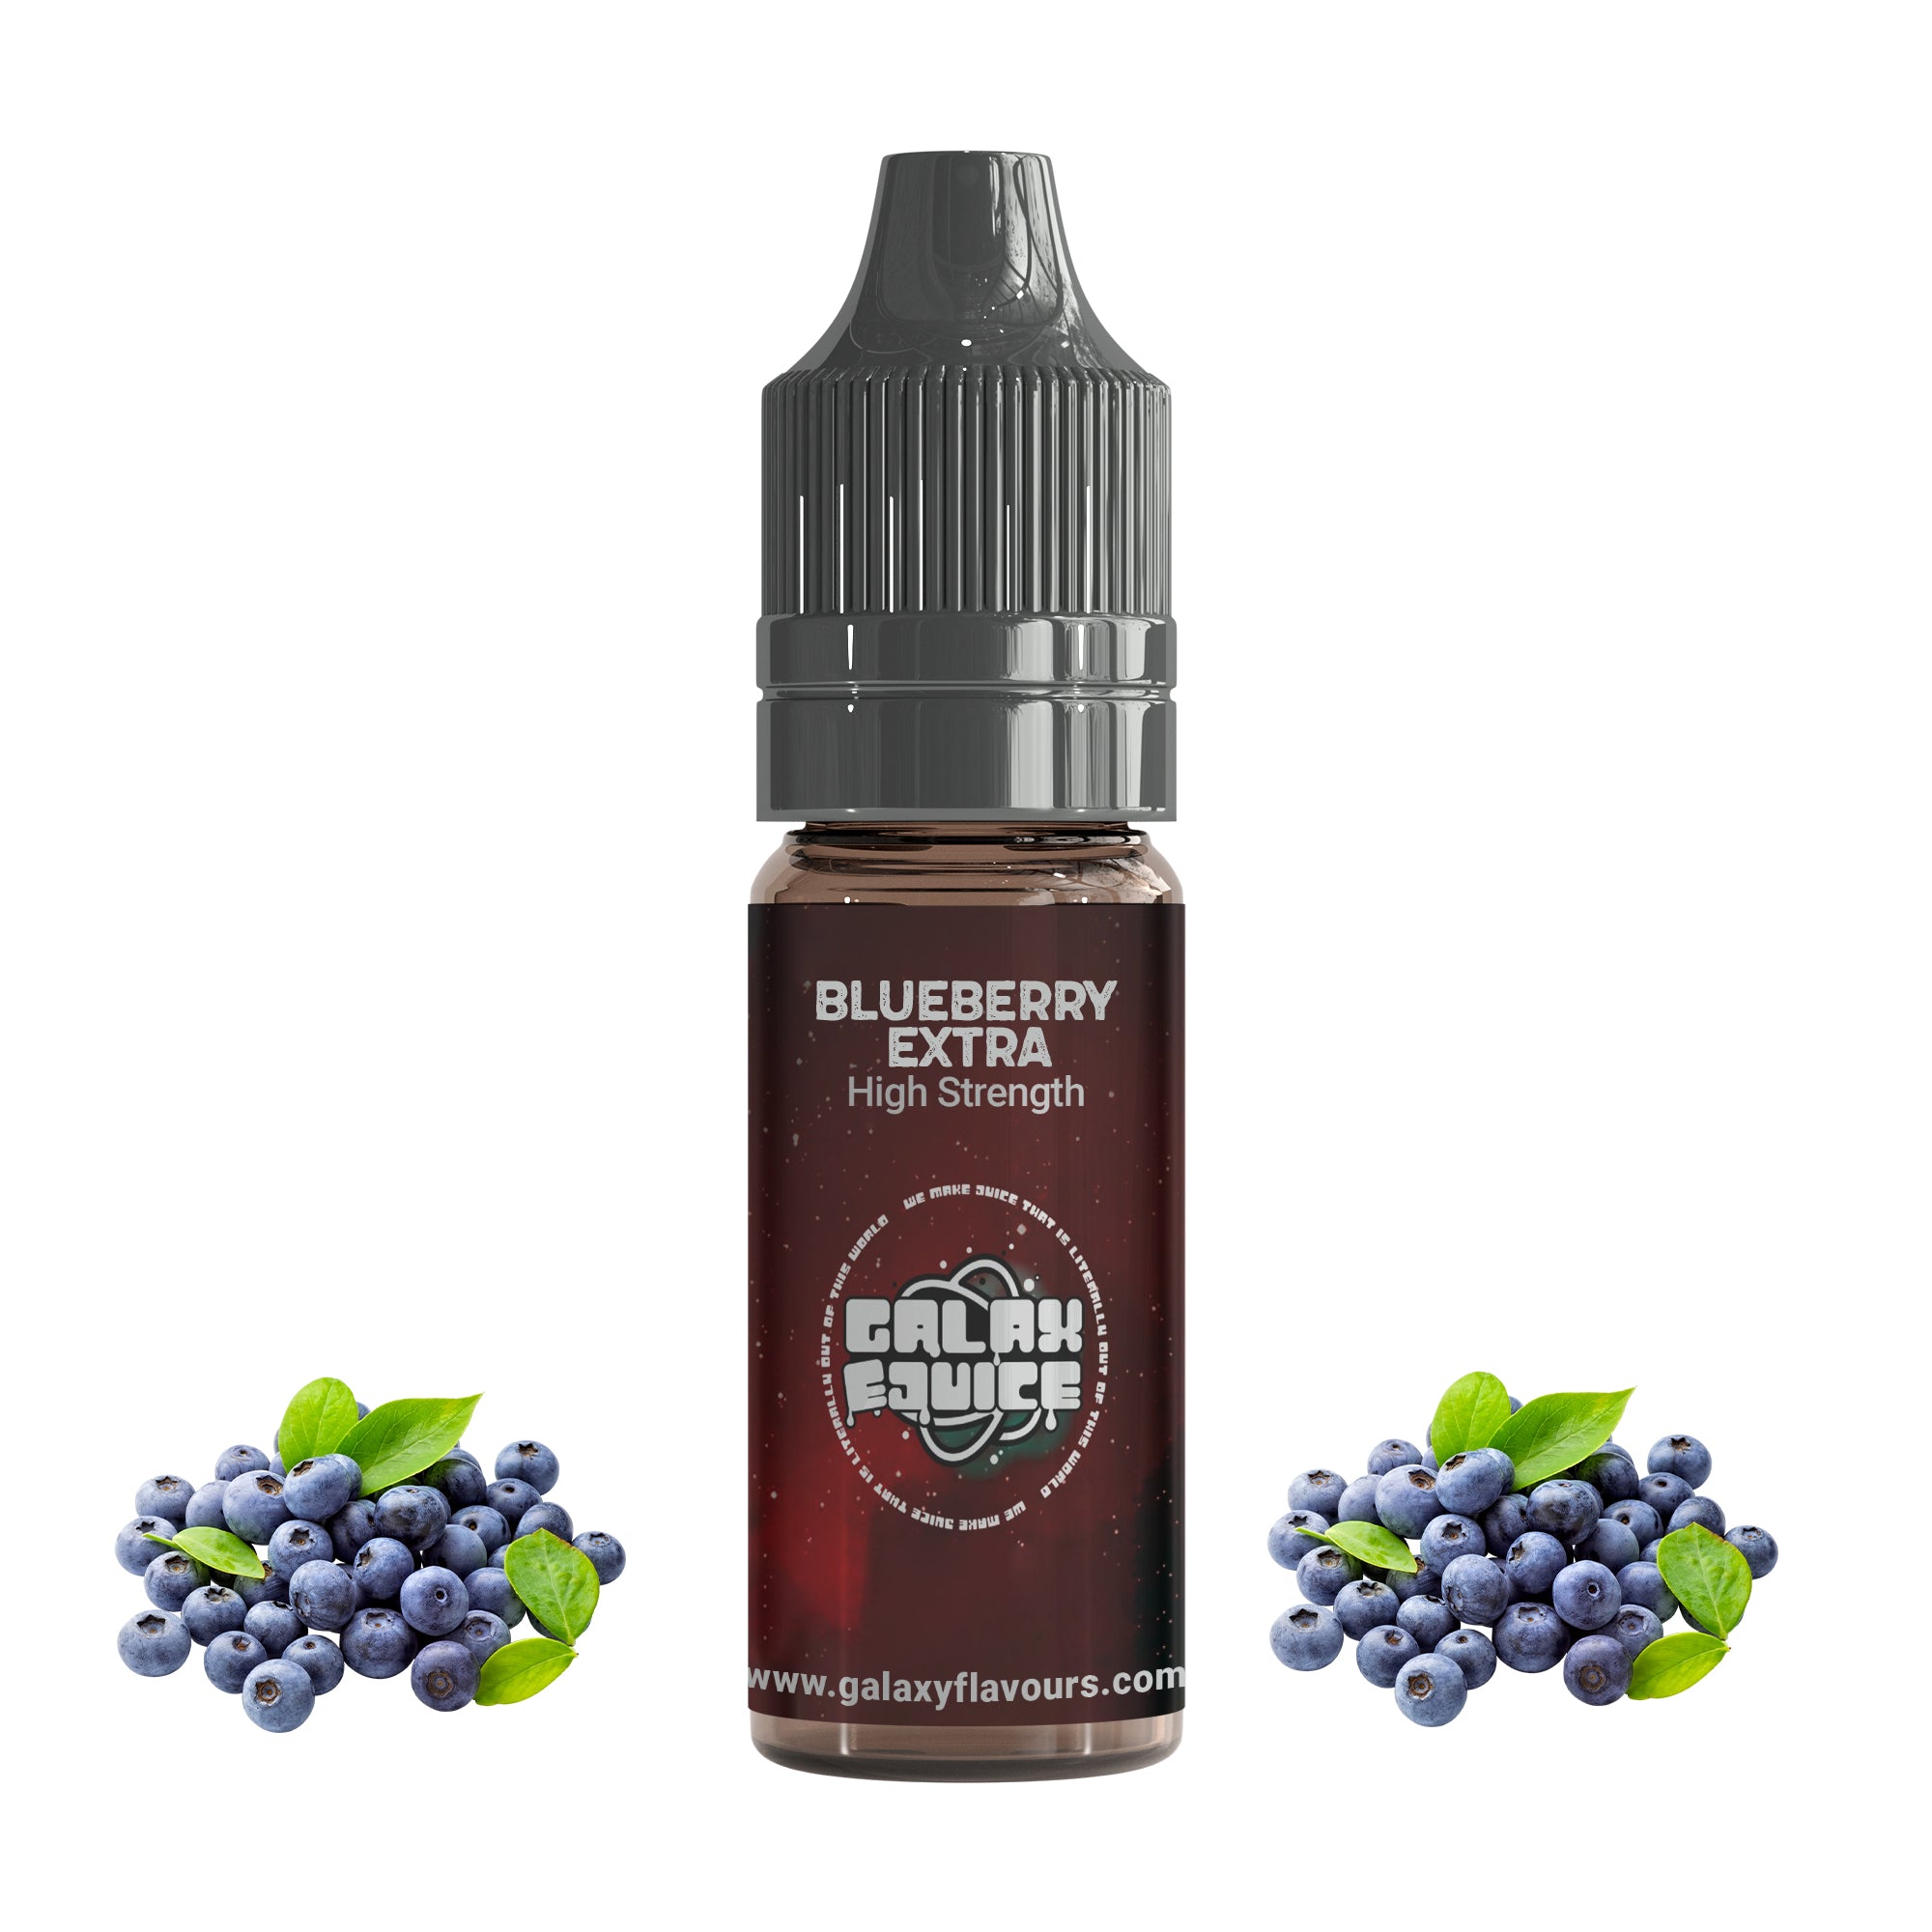 Blueberry Extra High Strength Professional Flavouring.